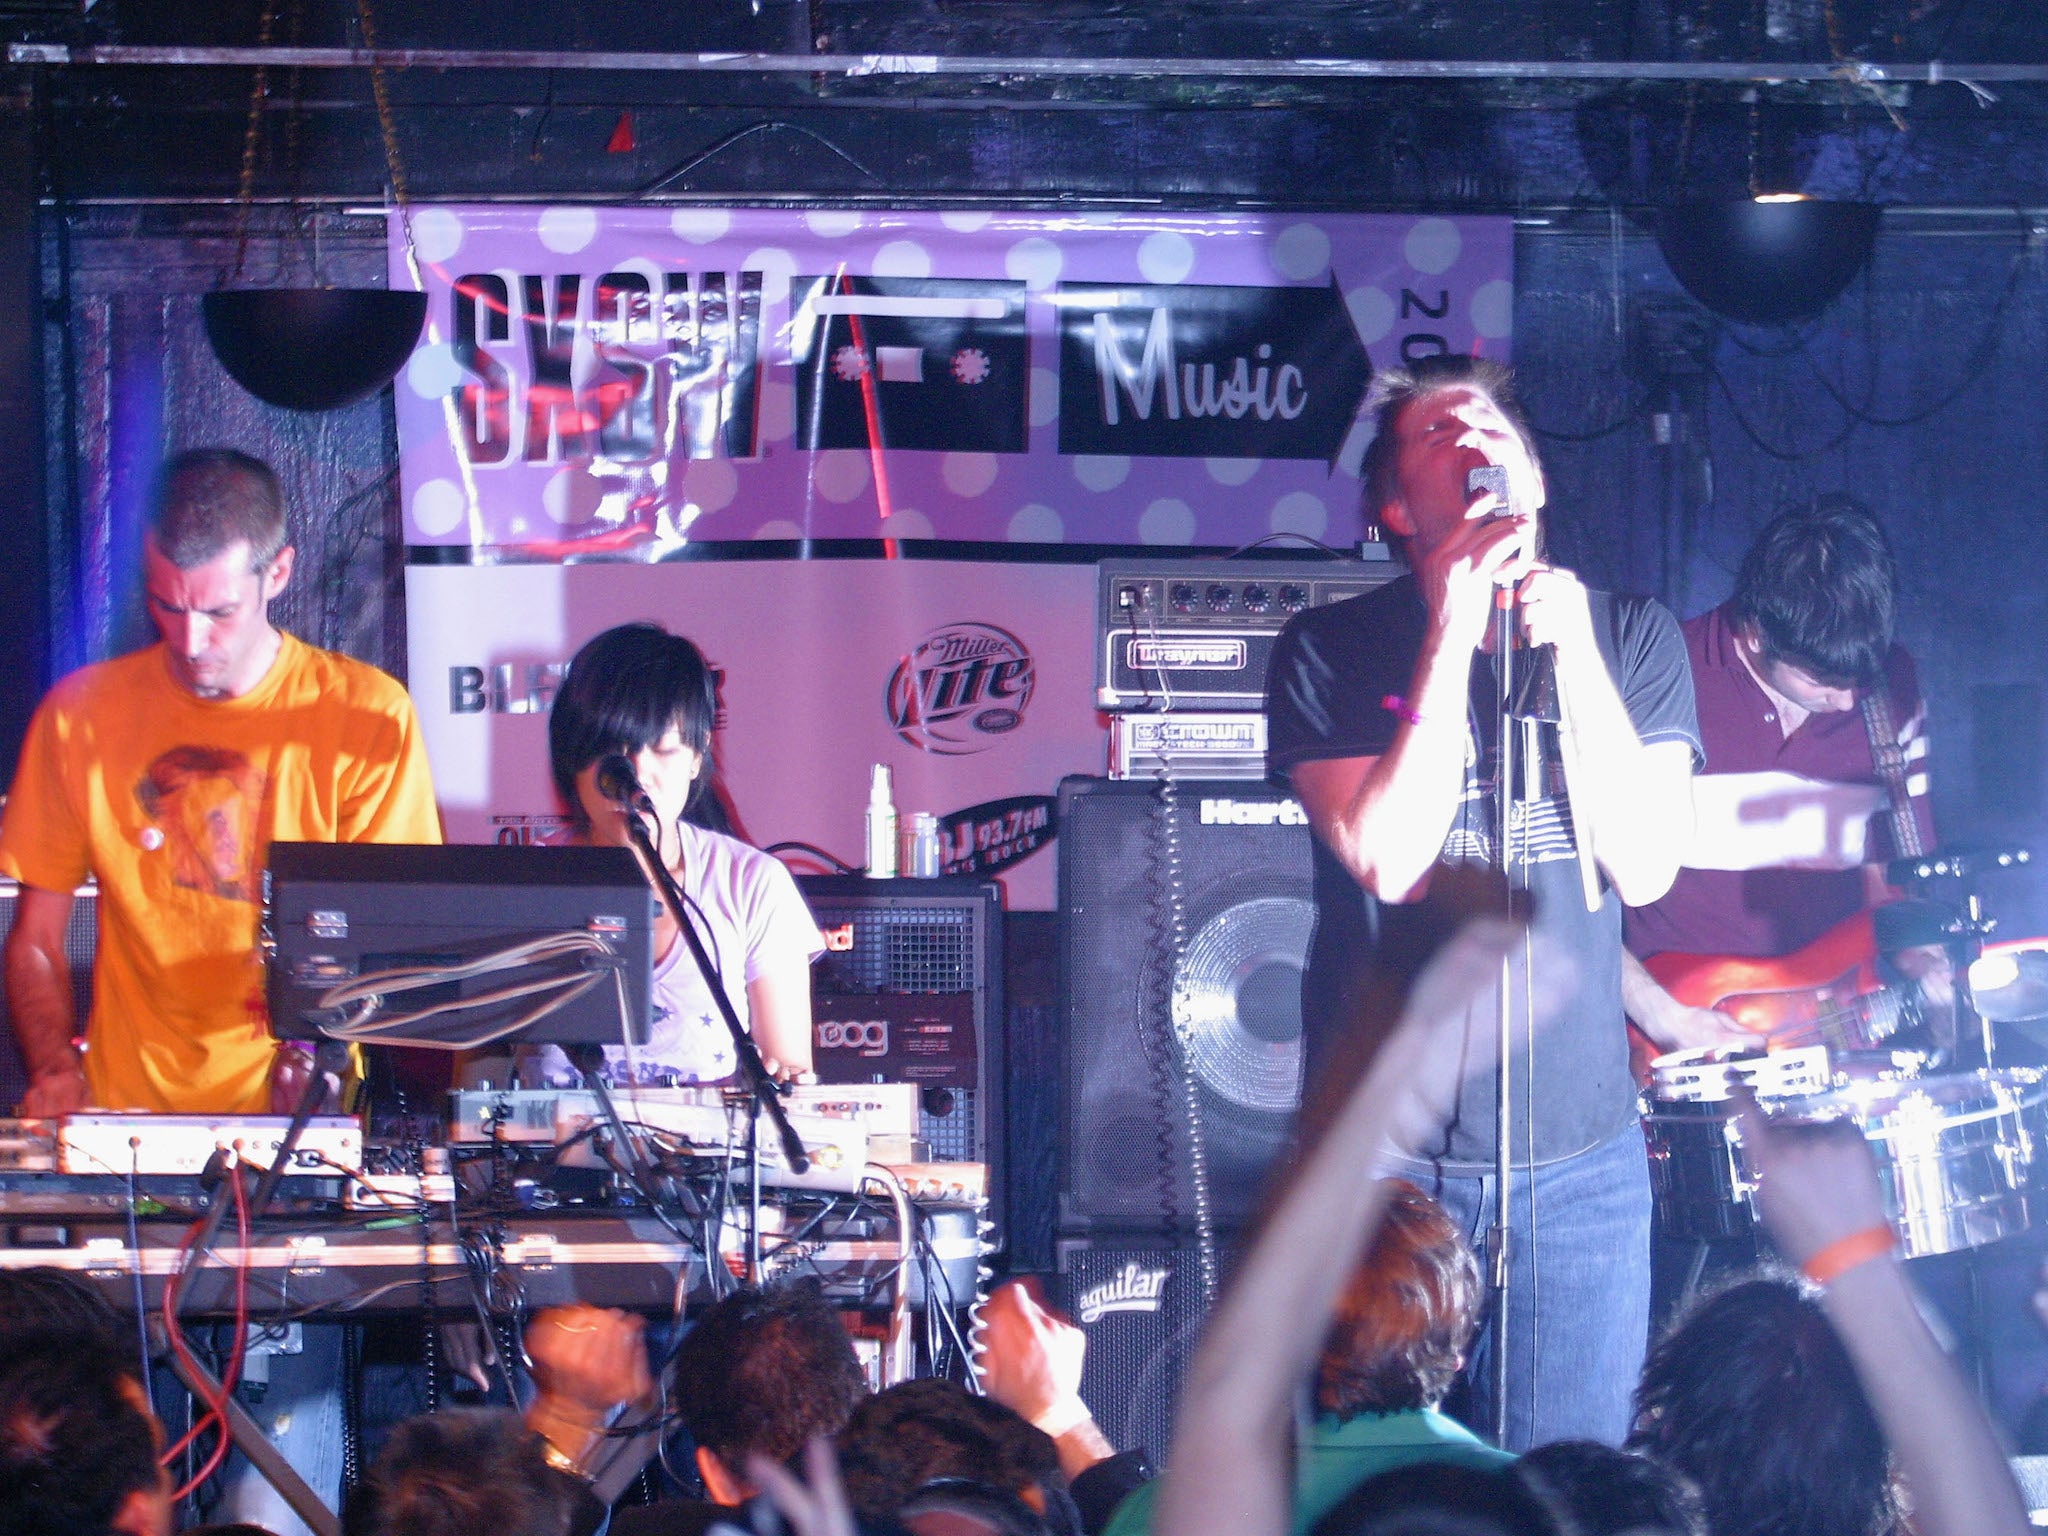 LCD Soundsystem perform during South by Southwest music festival in 2005 at The Elysium in Austin, Texas